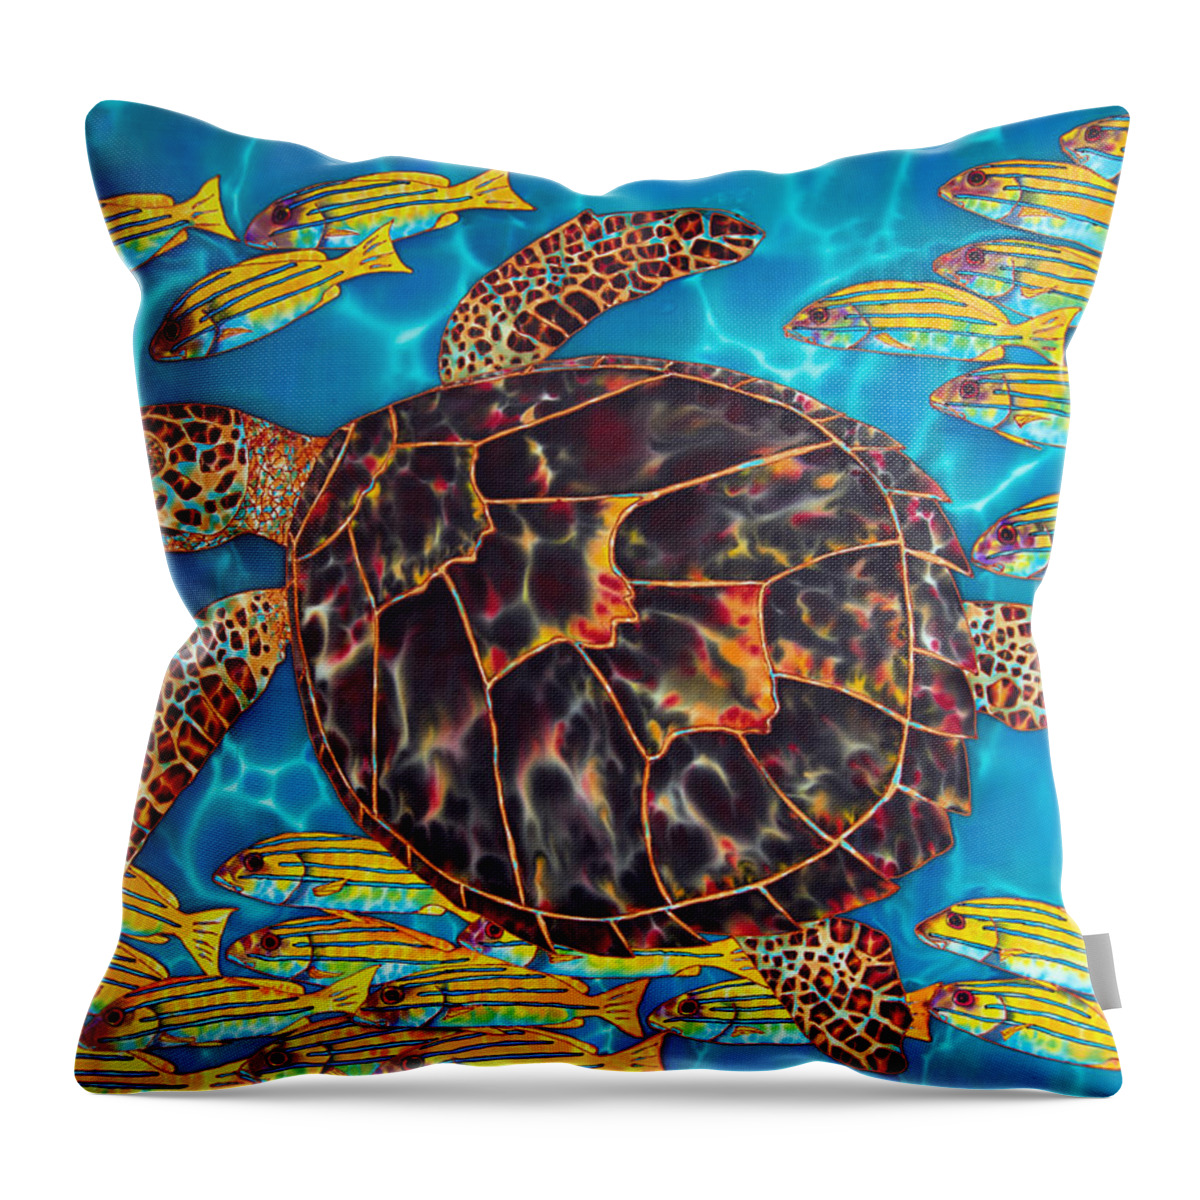 Sea Turtle Throw Pillow featuring the painting Sea Turtle with Schooling Fish by Daniel Jean-Baptiste